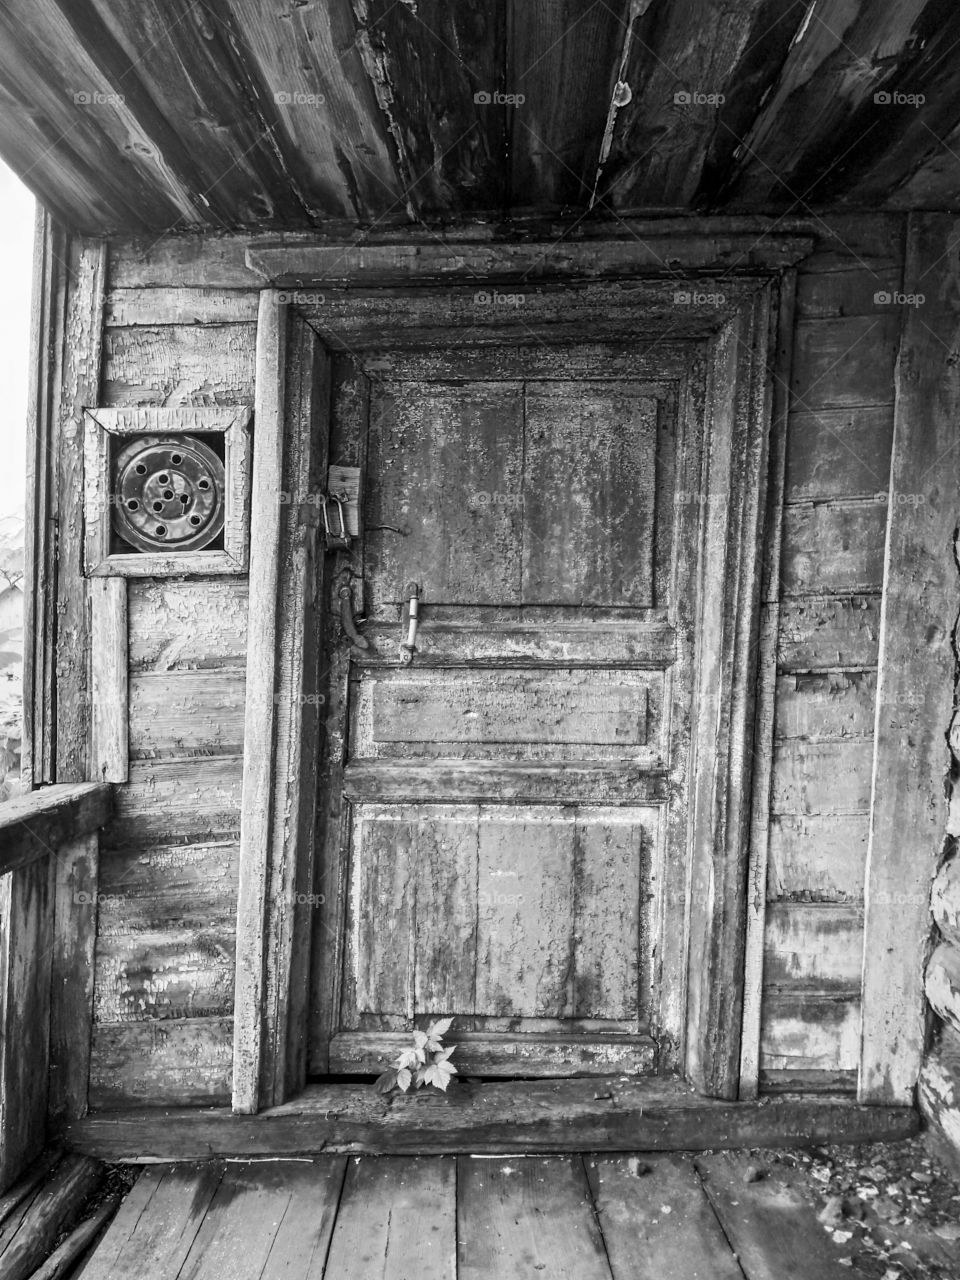 Old Door on the porch of a wooden house